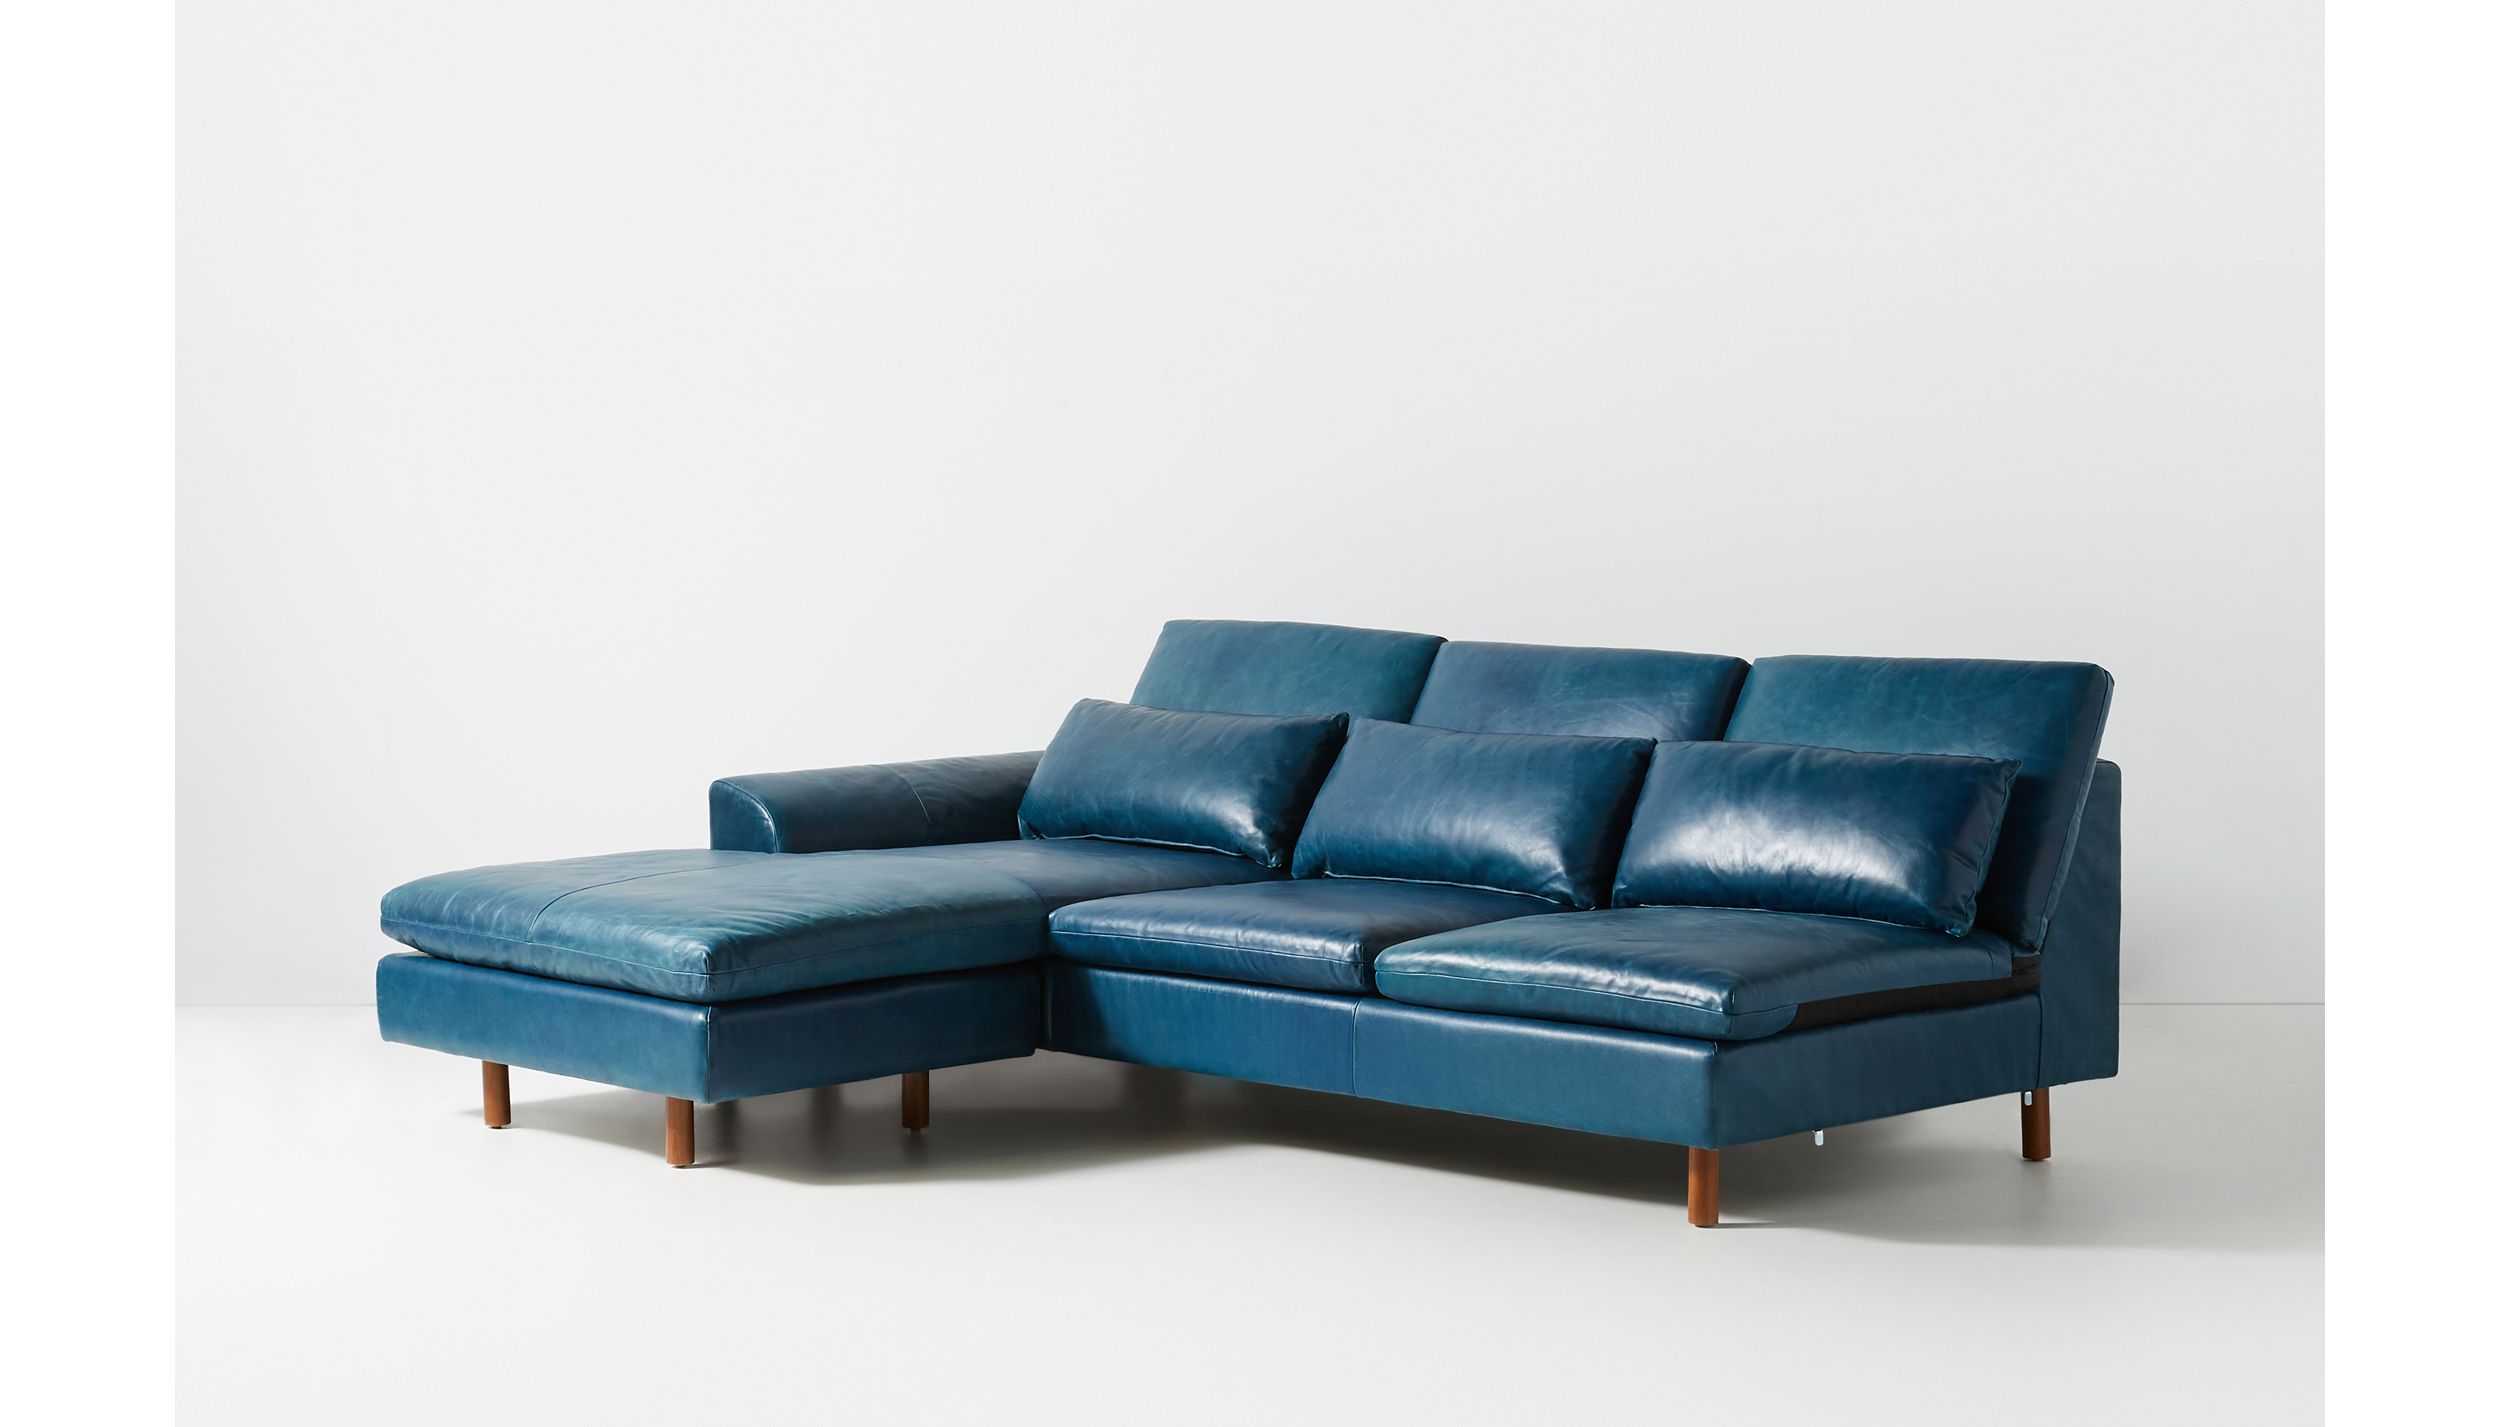 Mirren Modular Leather Reversible One, Teal Leather Sectional